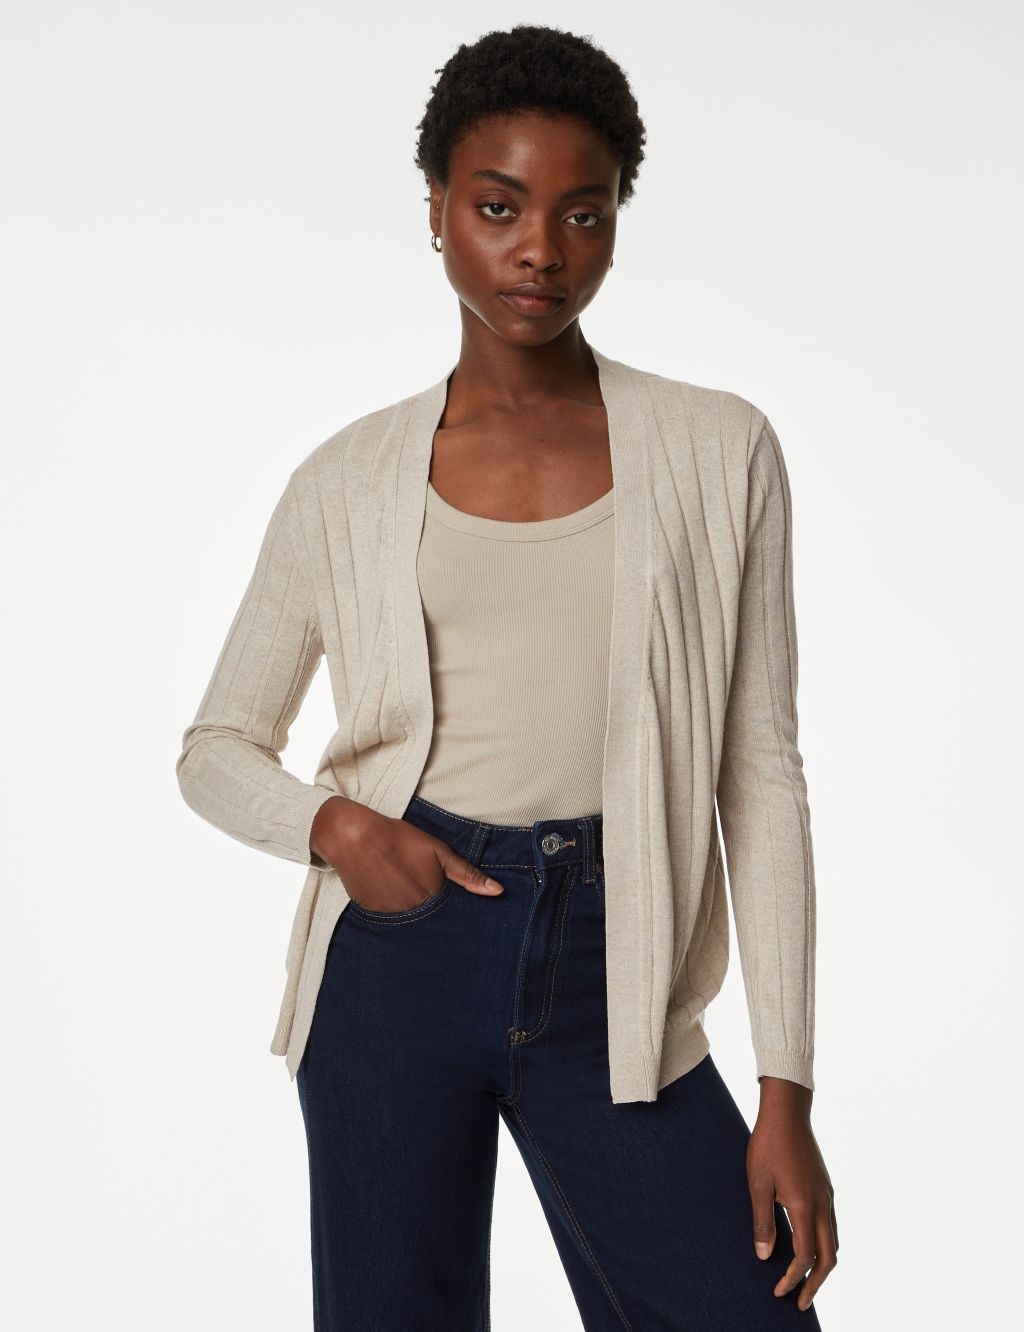 Edge to Edge Relaxed Cardigan with Linen image 3